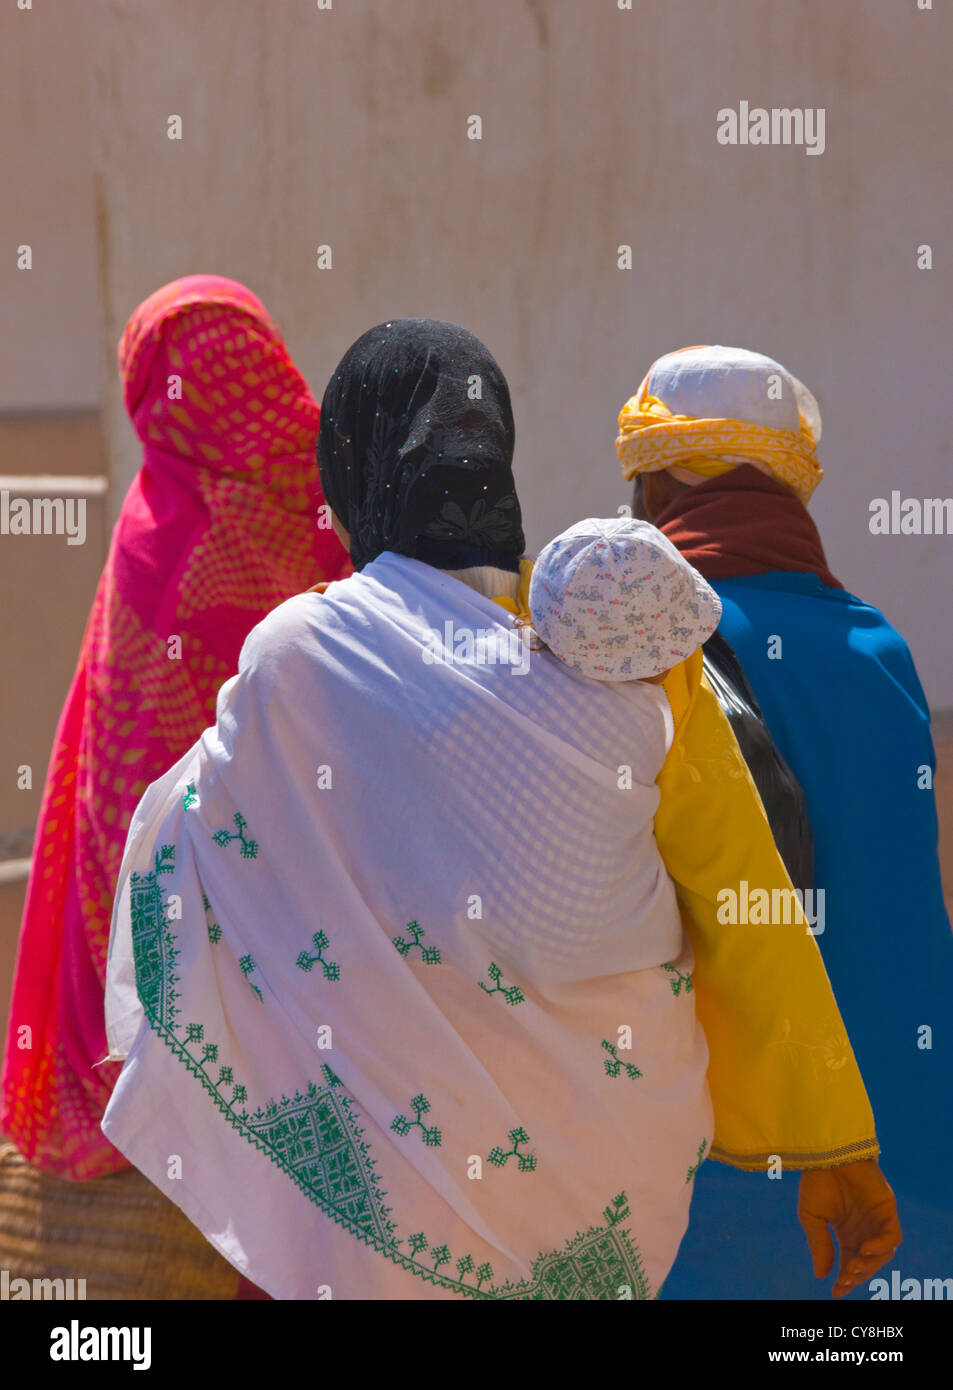 People in colorful attire on the street in old medina, Essaouira, Morocco Stock Photo